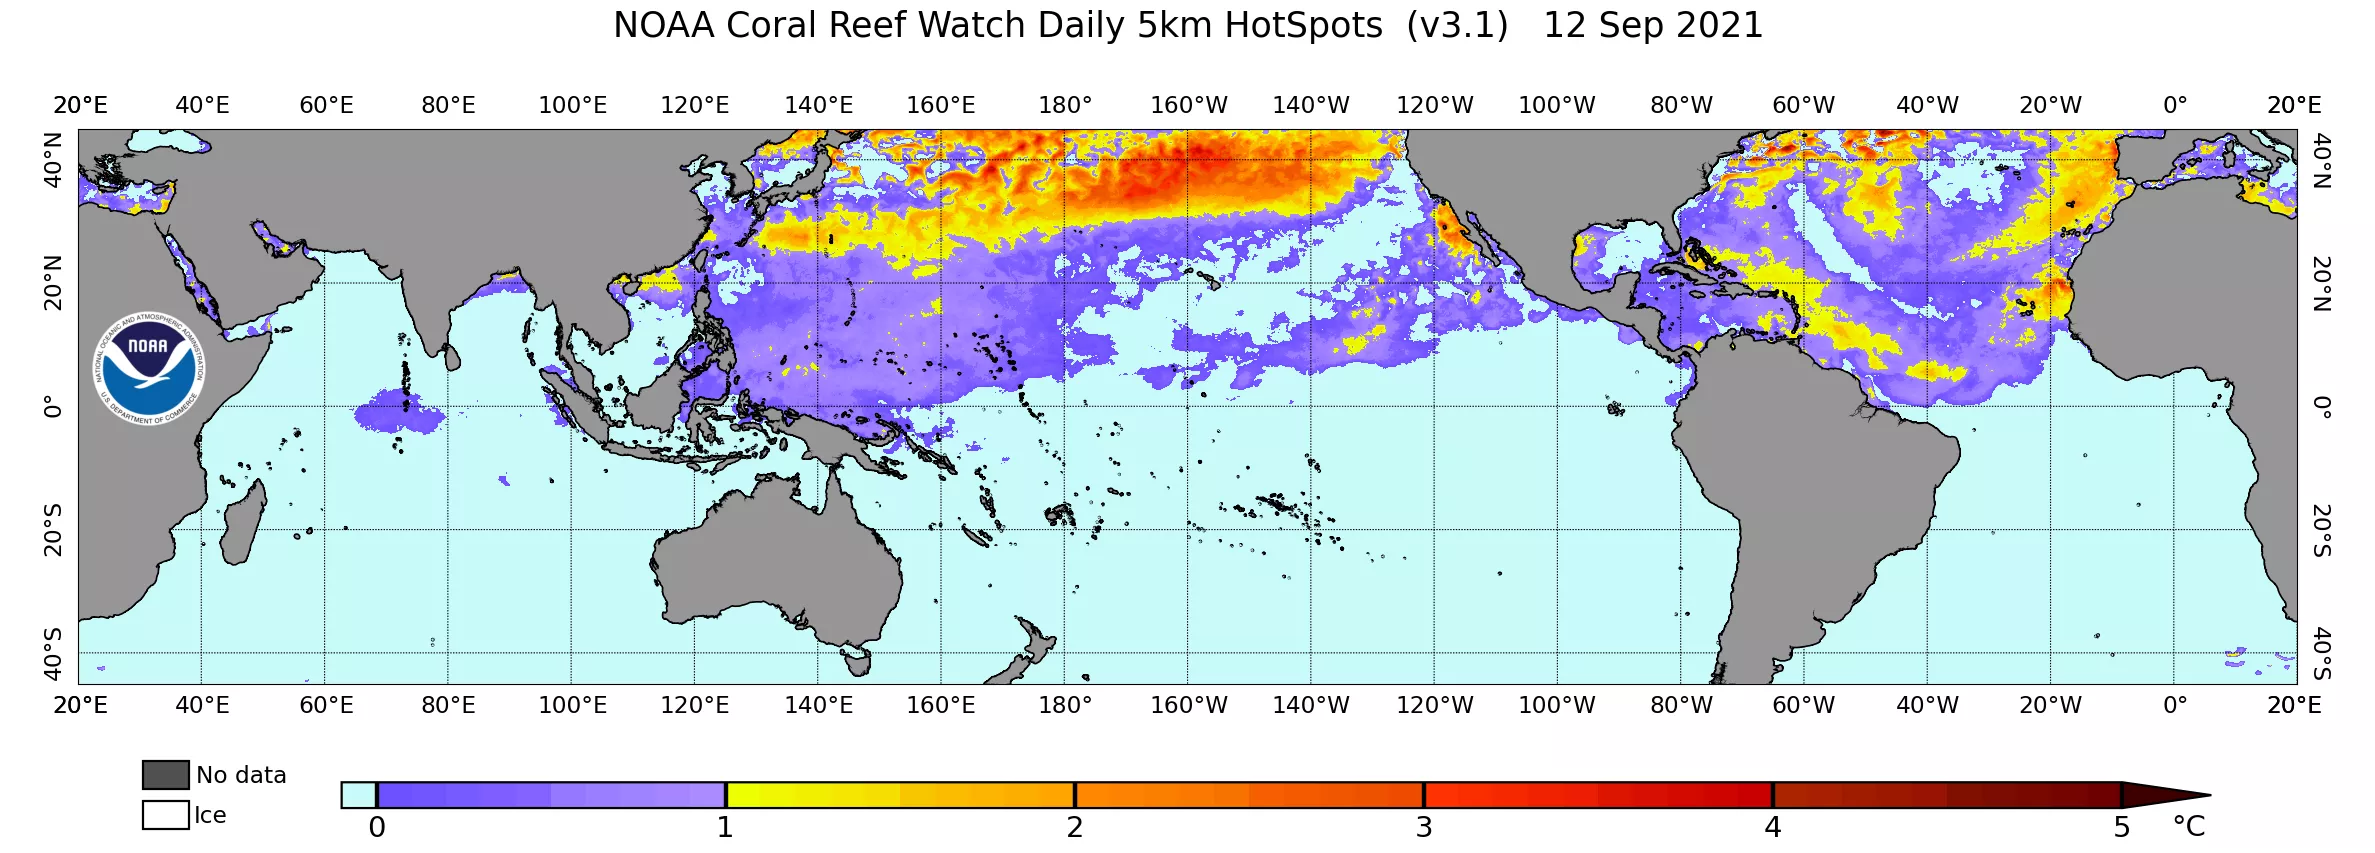 Satellite-derived visualization showing daily global coral bleaching heat stress hot spots from Sept. 12, 2021.